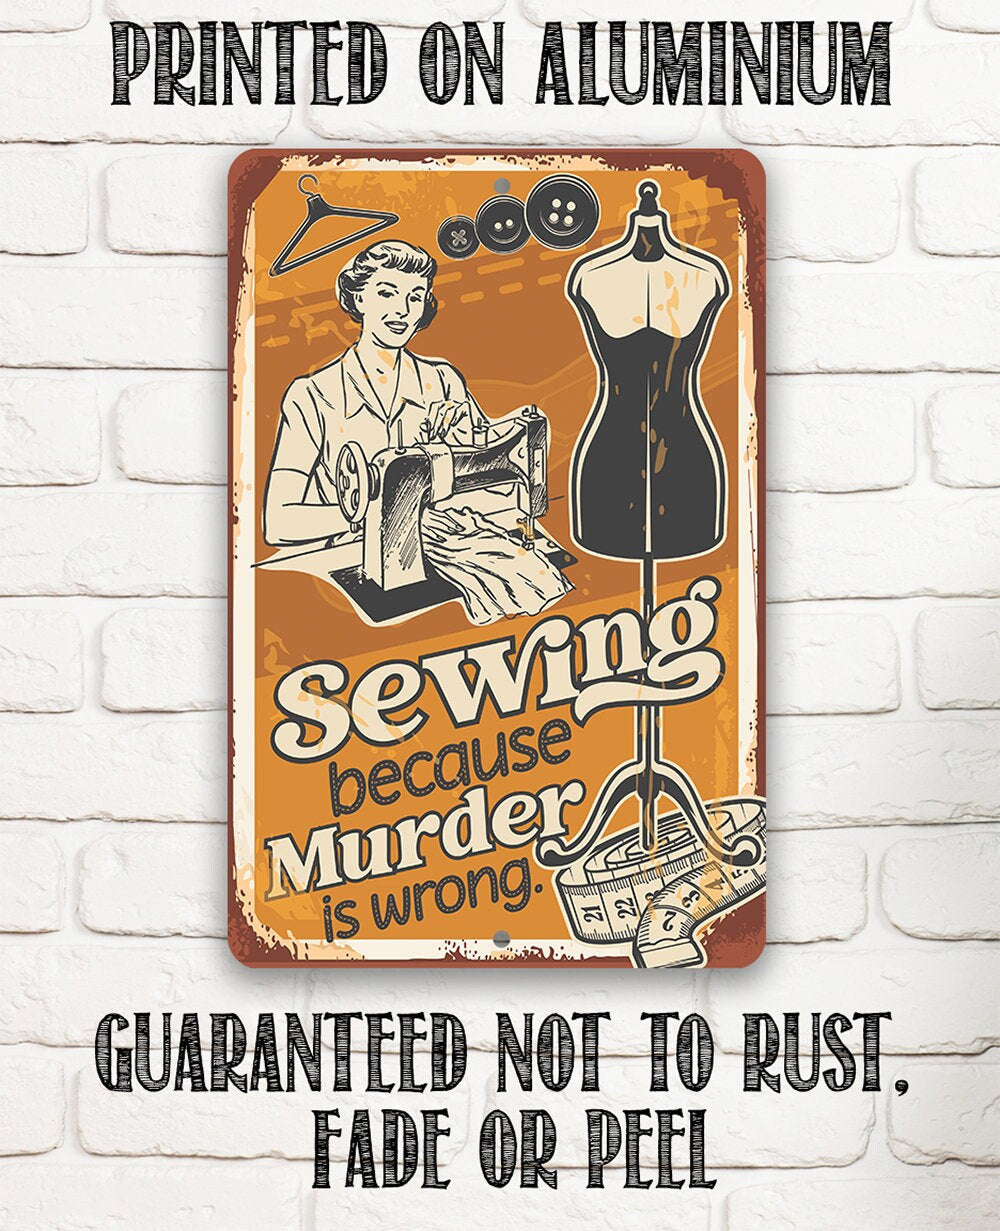 Sewing Because Murder is Wrong - Metal Sign Metal Sign Lone Star Art 